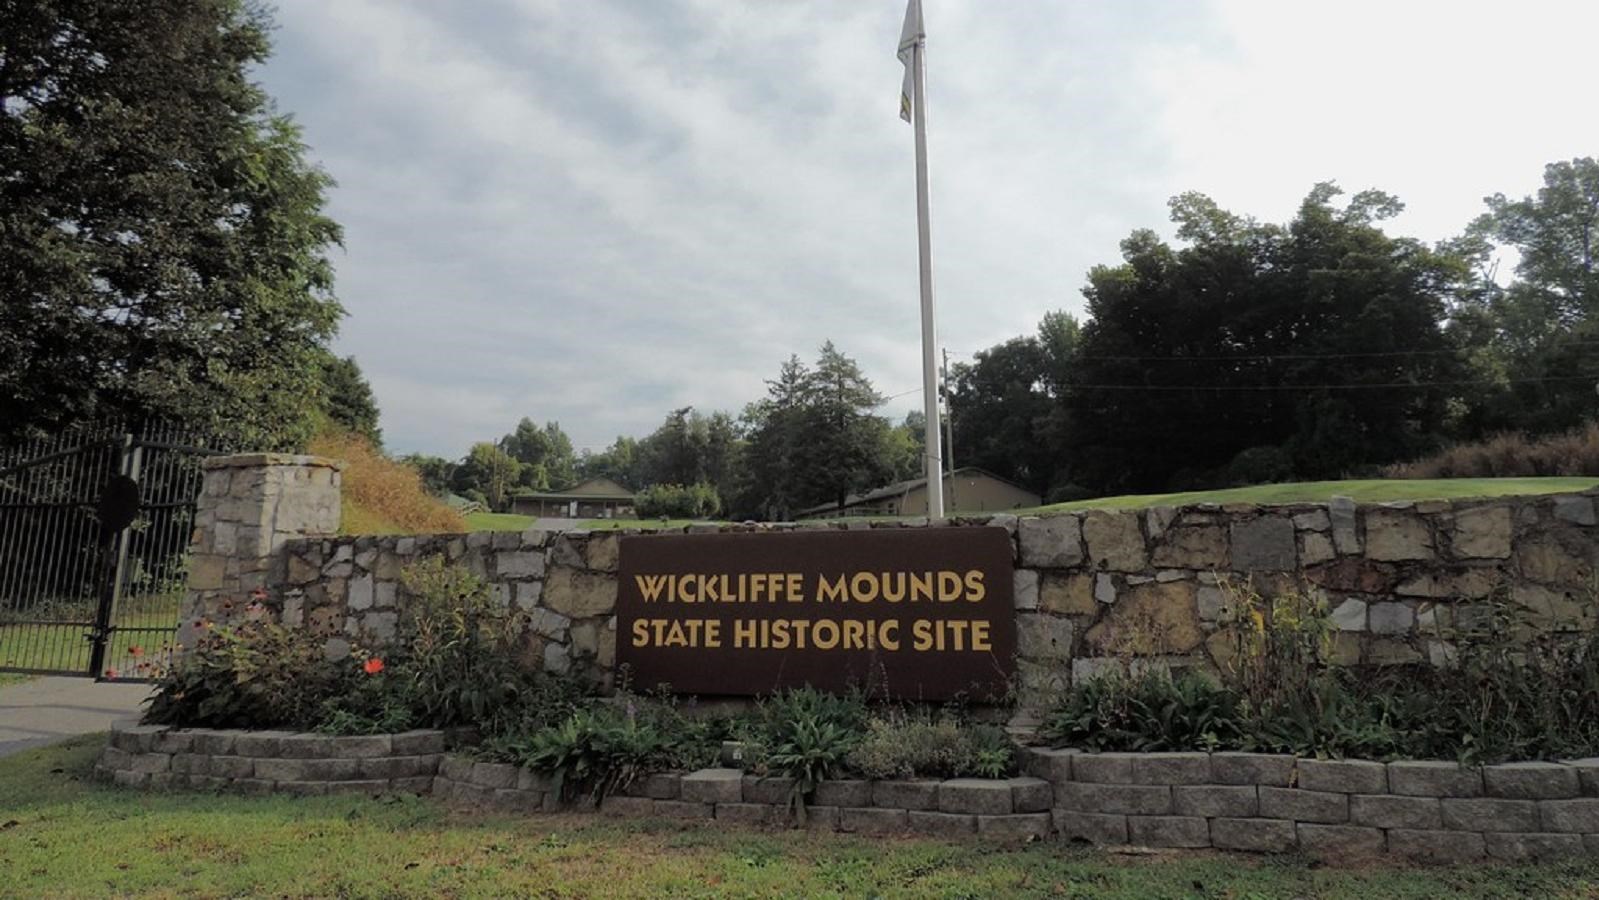 A low stone wall supports a dark sign reading “Wickliffe Mounds State Historic Site”